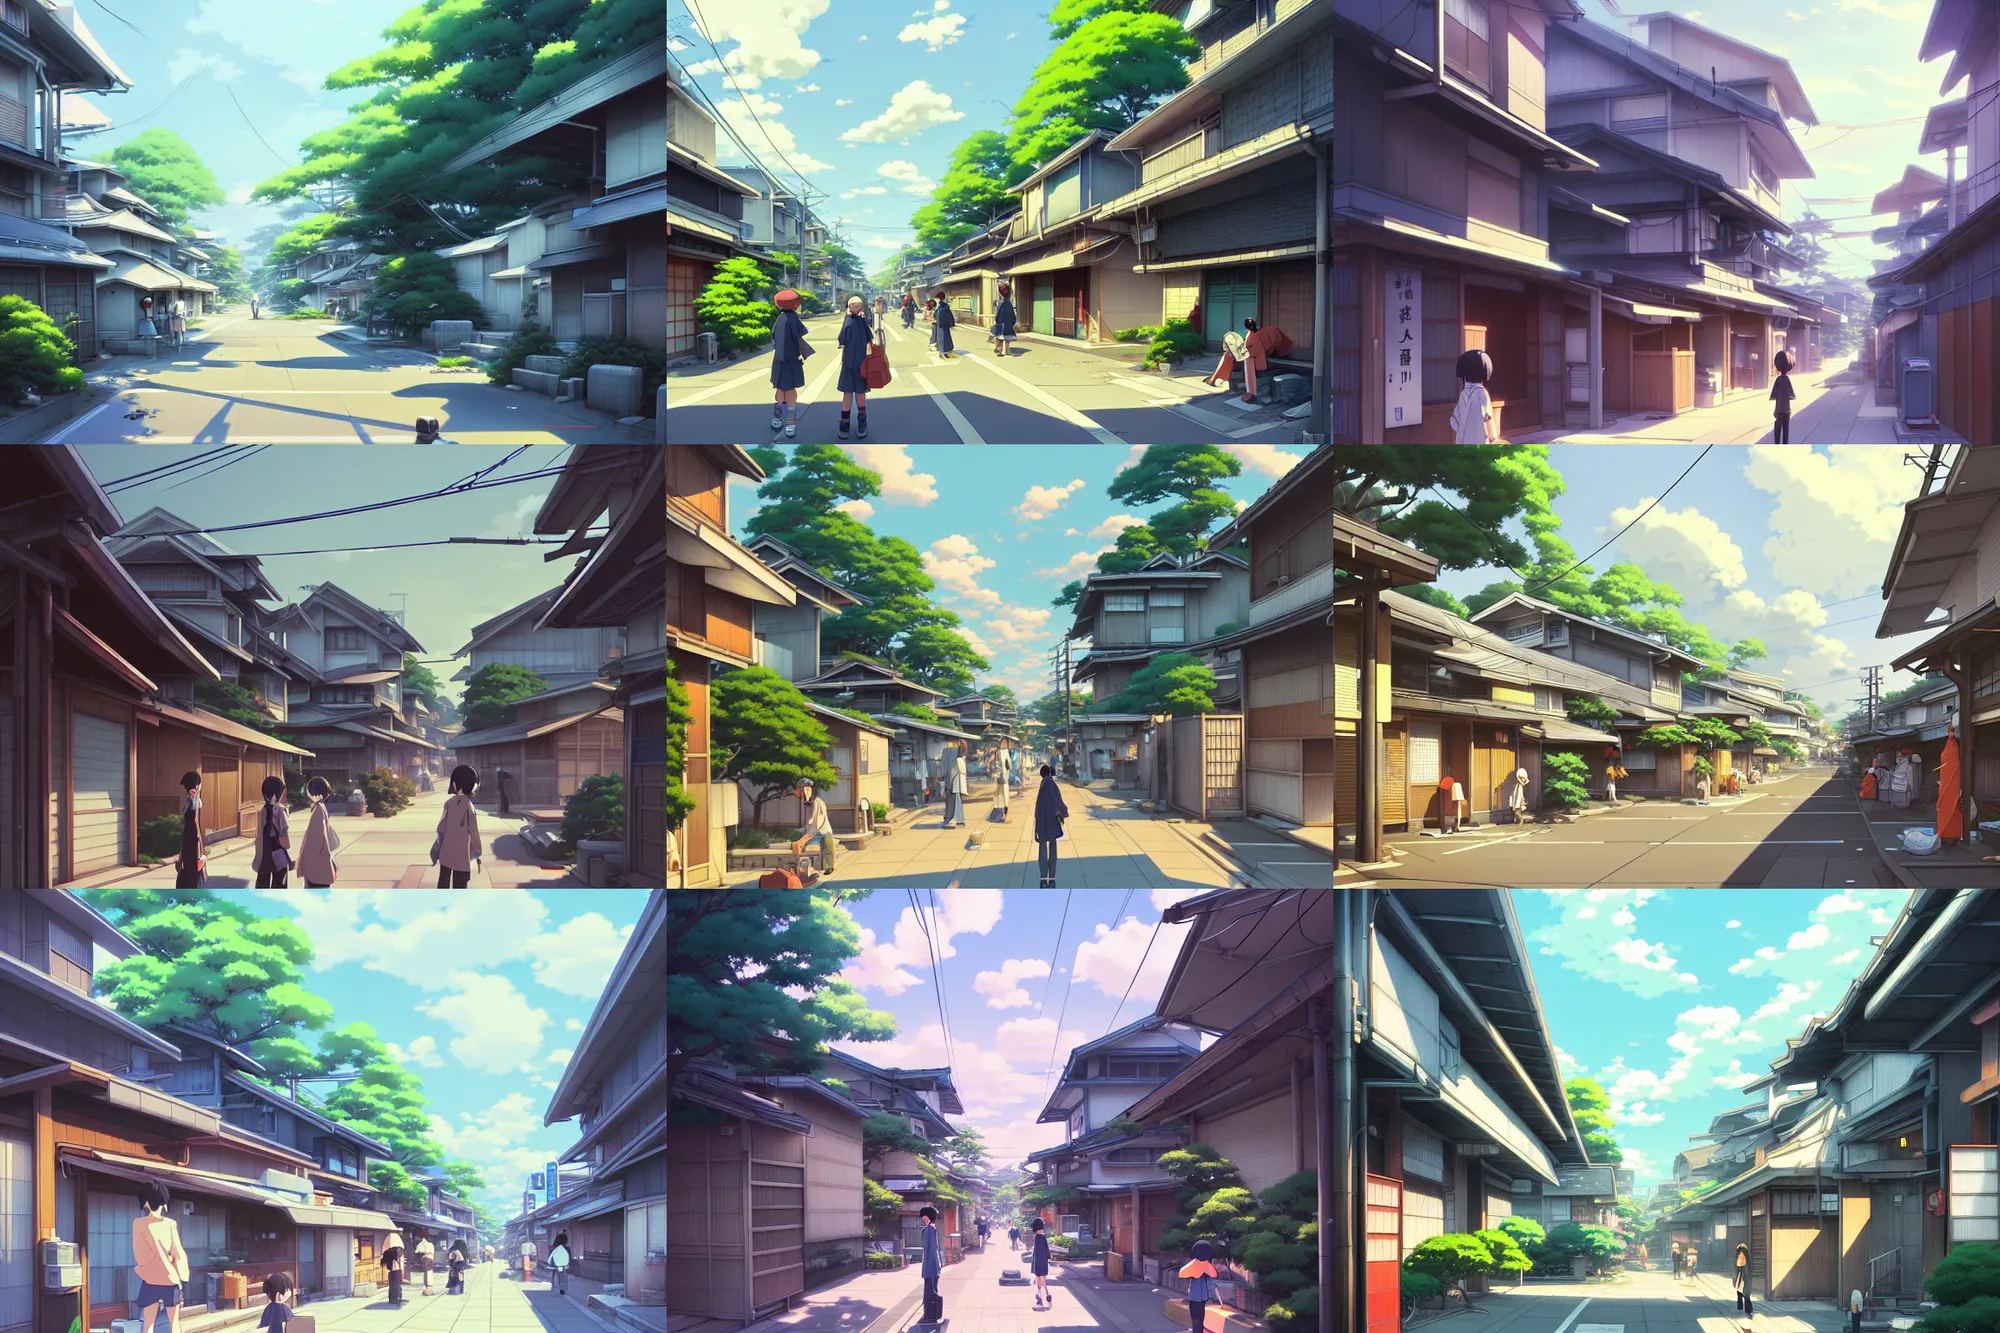 verbal promise no Twitter Today i paint my town city background Anime  city Painter Anime Town bridge trees Blues beauty  httpstcoS3ShlzwQgK  Twitter